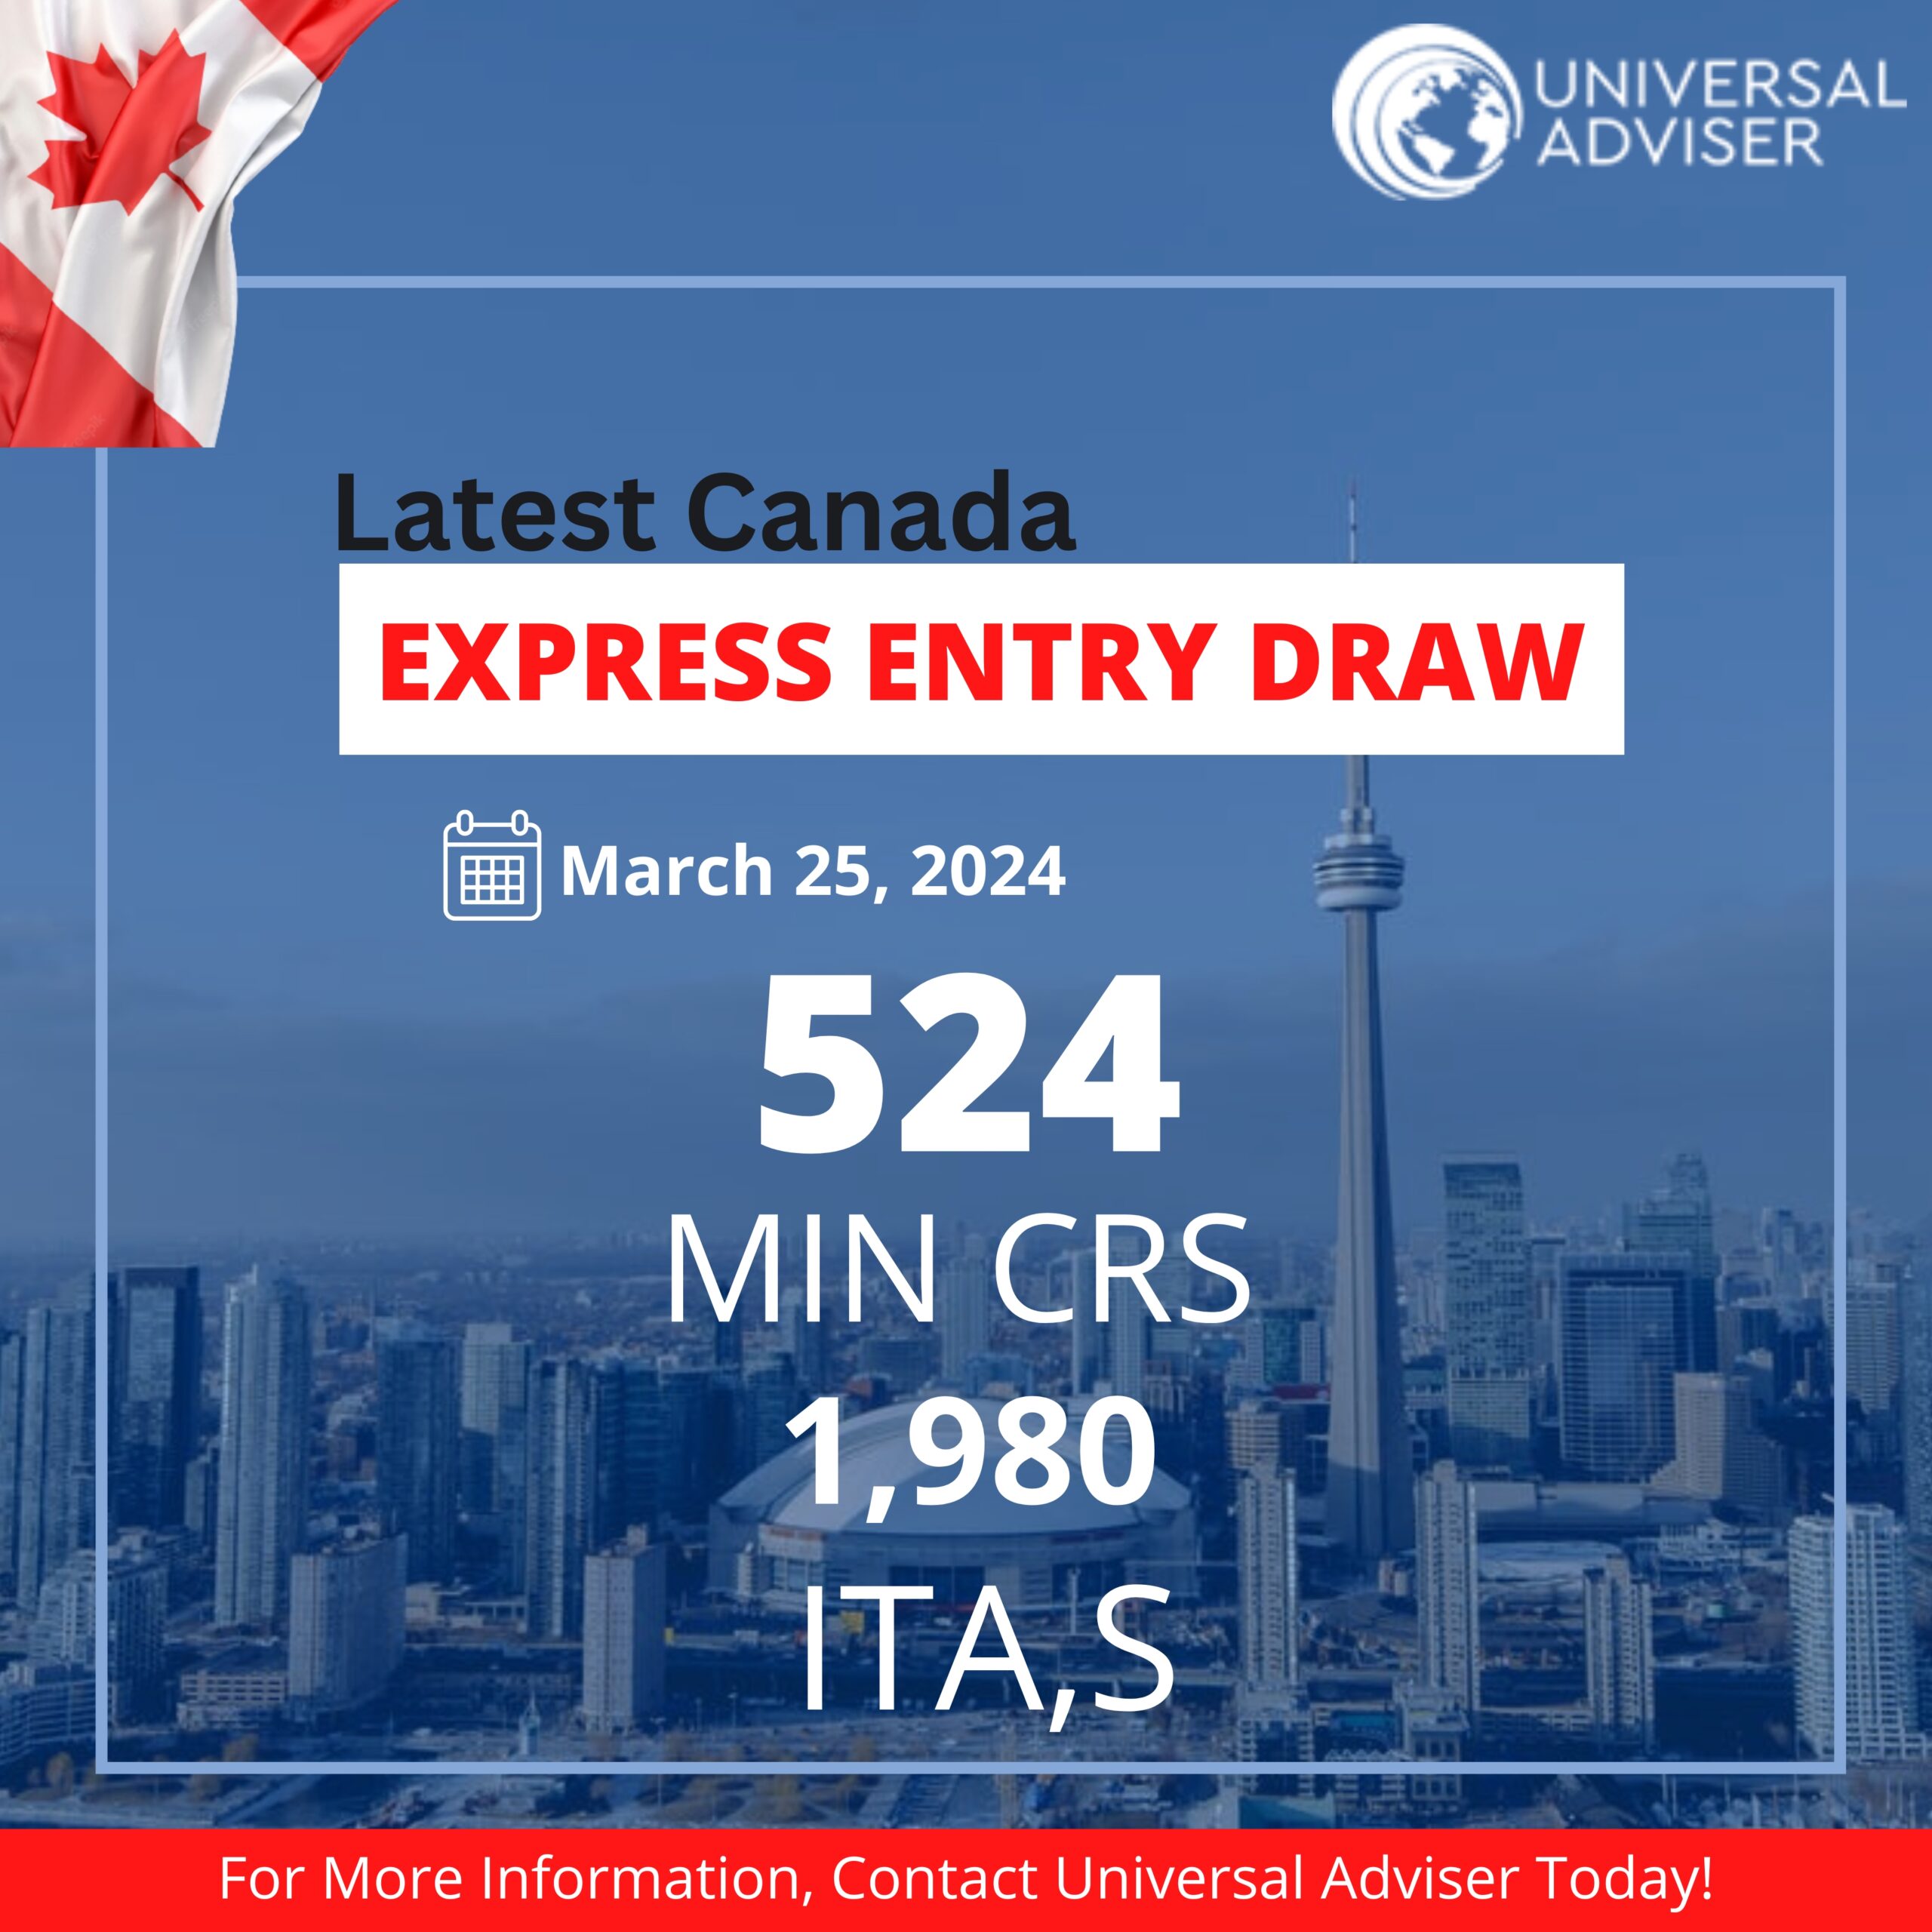 Express Entry Draw 271 | 3,600 Invited in Healthcare Draw - Canadim